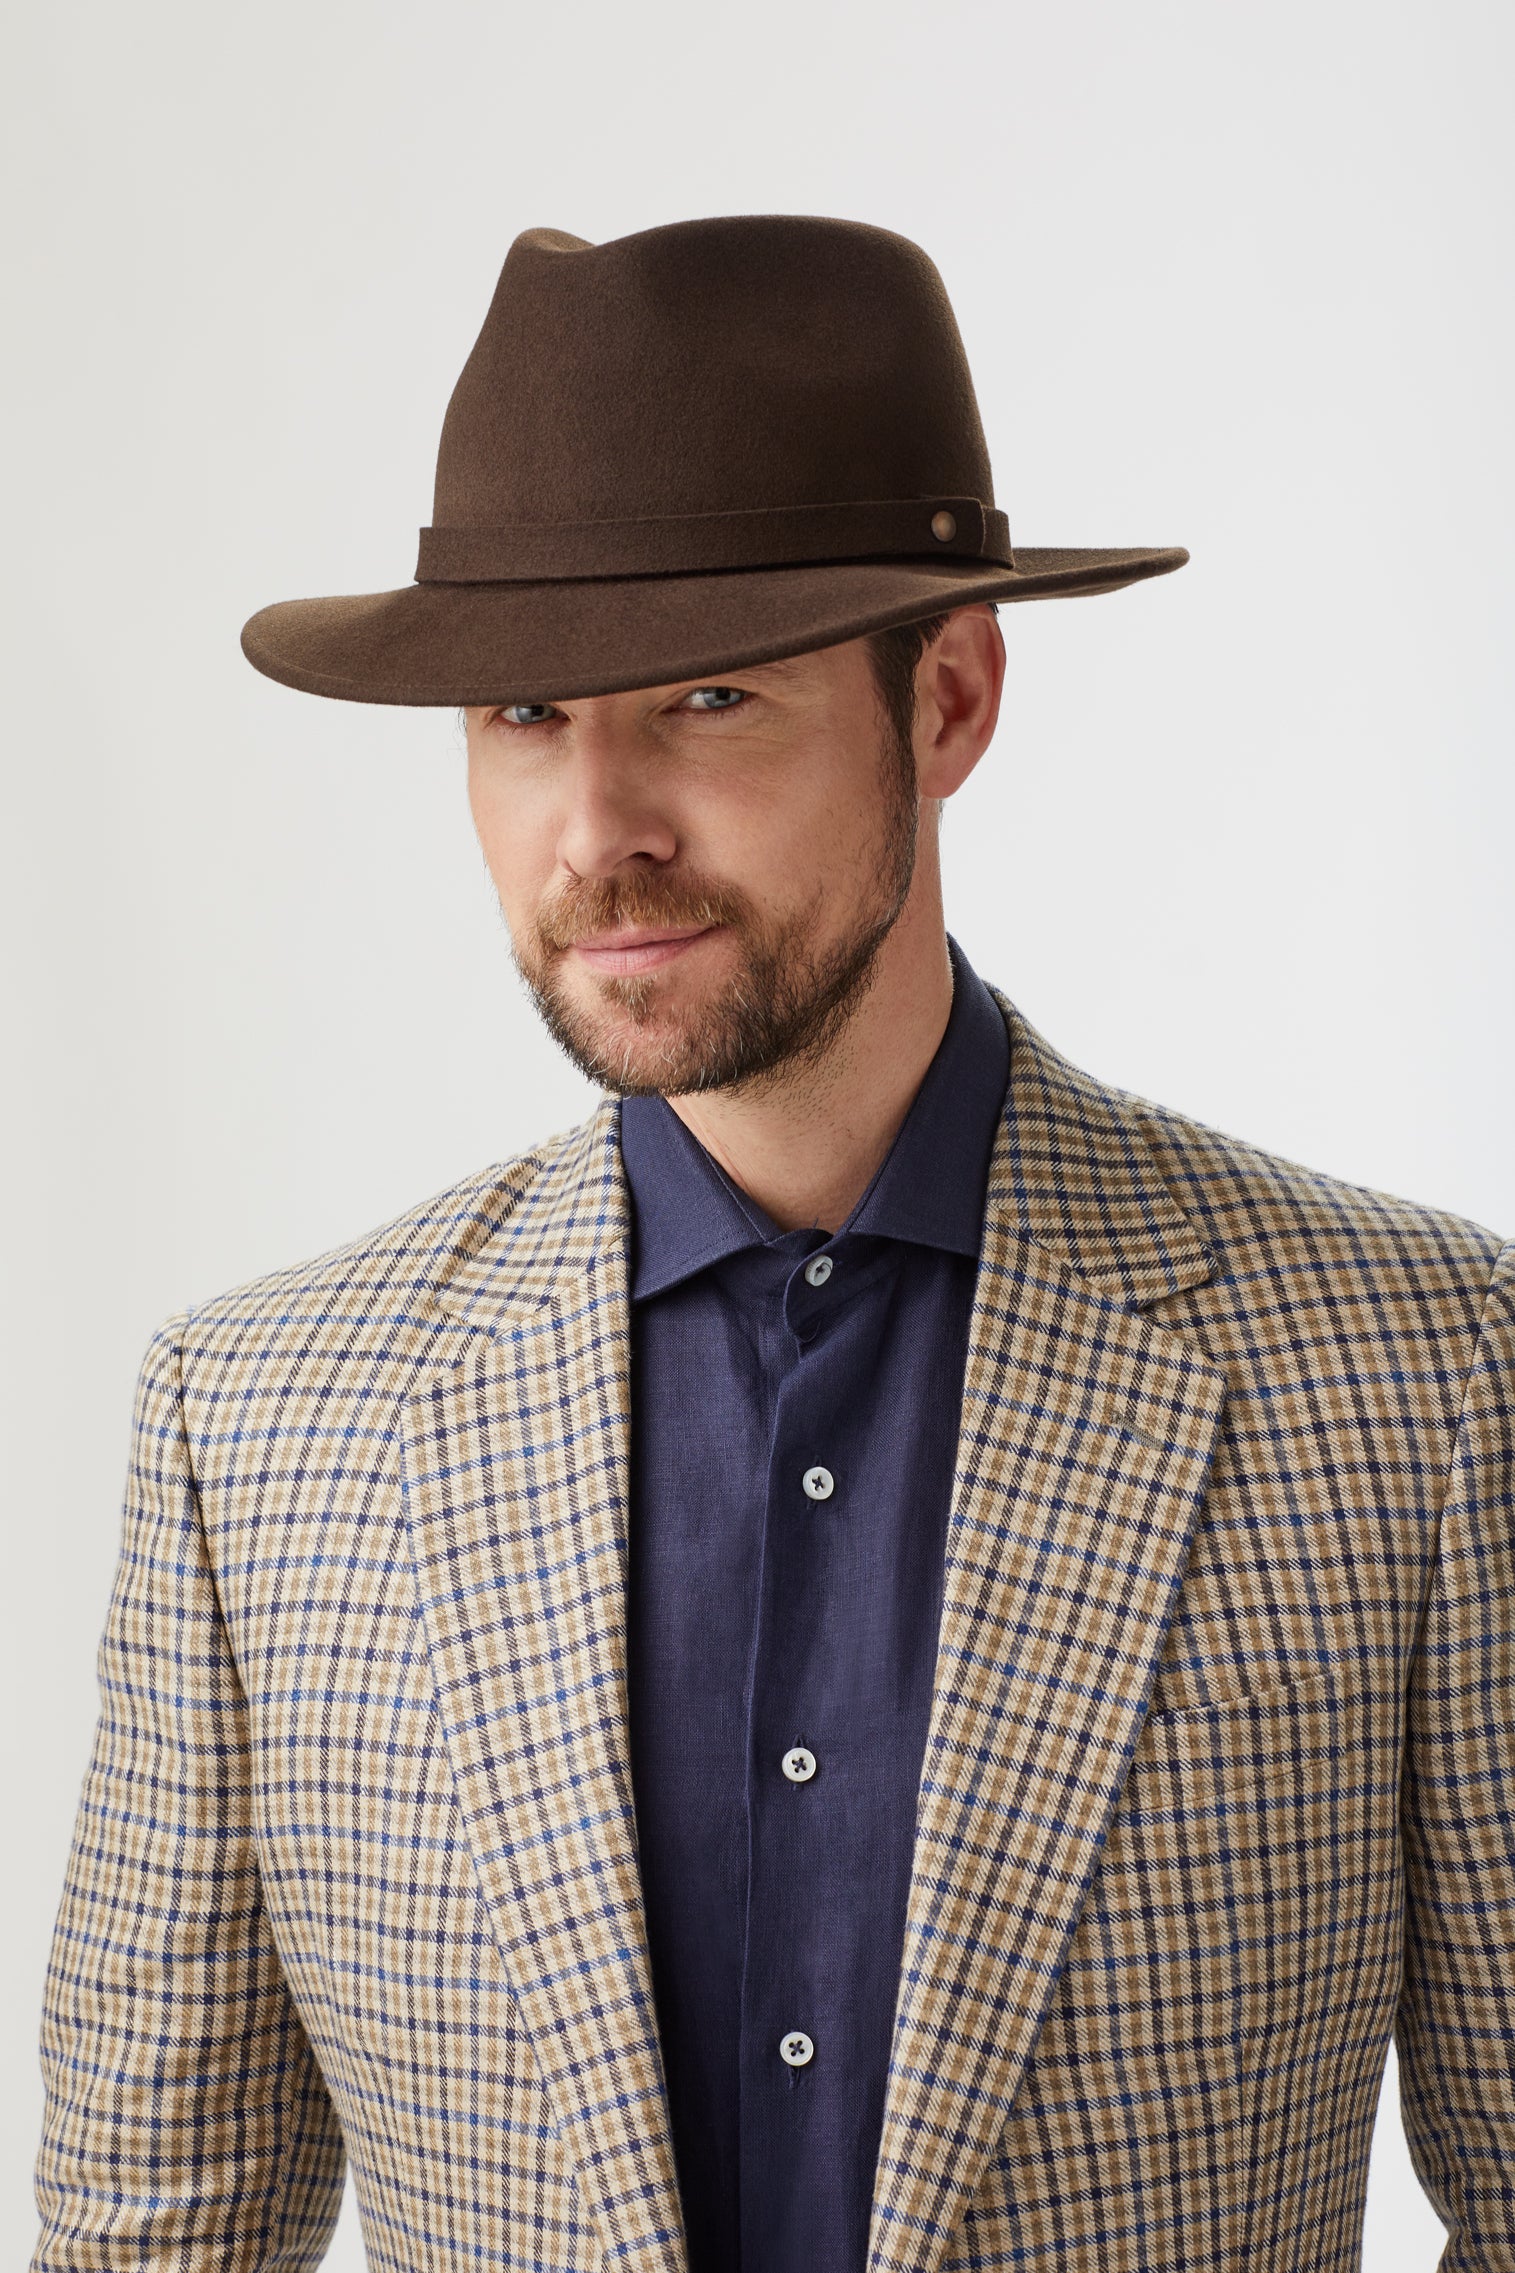 Nomad Rollable Trilby - Hats for Oval Face Shapes - Lock & Co. Hatters London UK